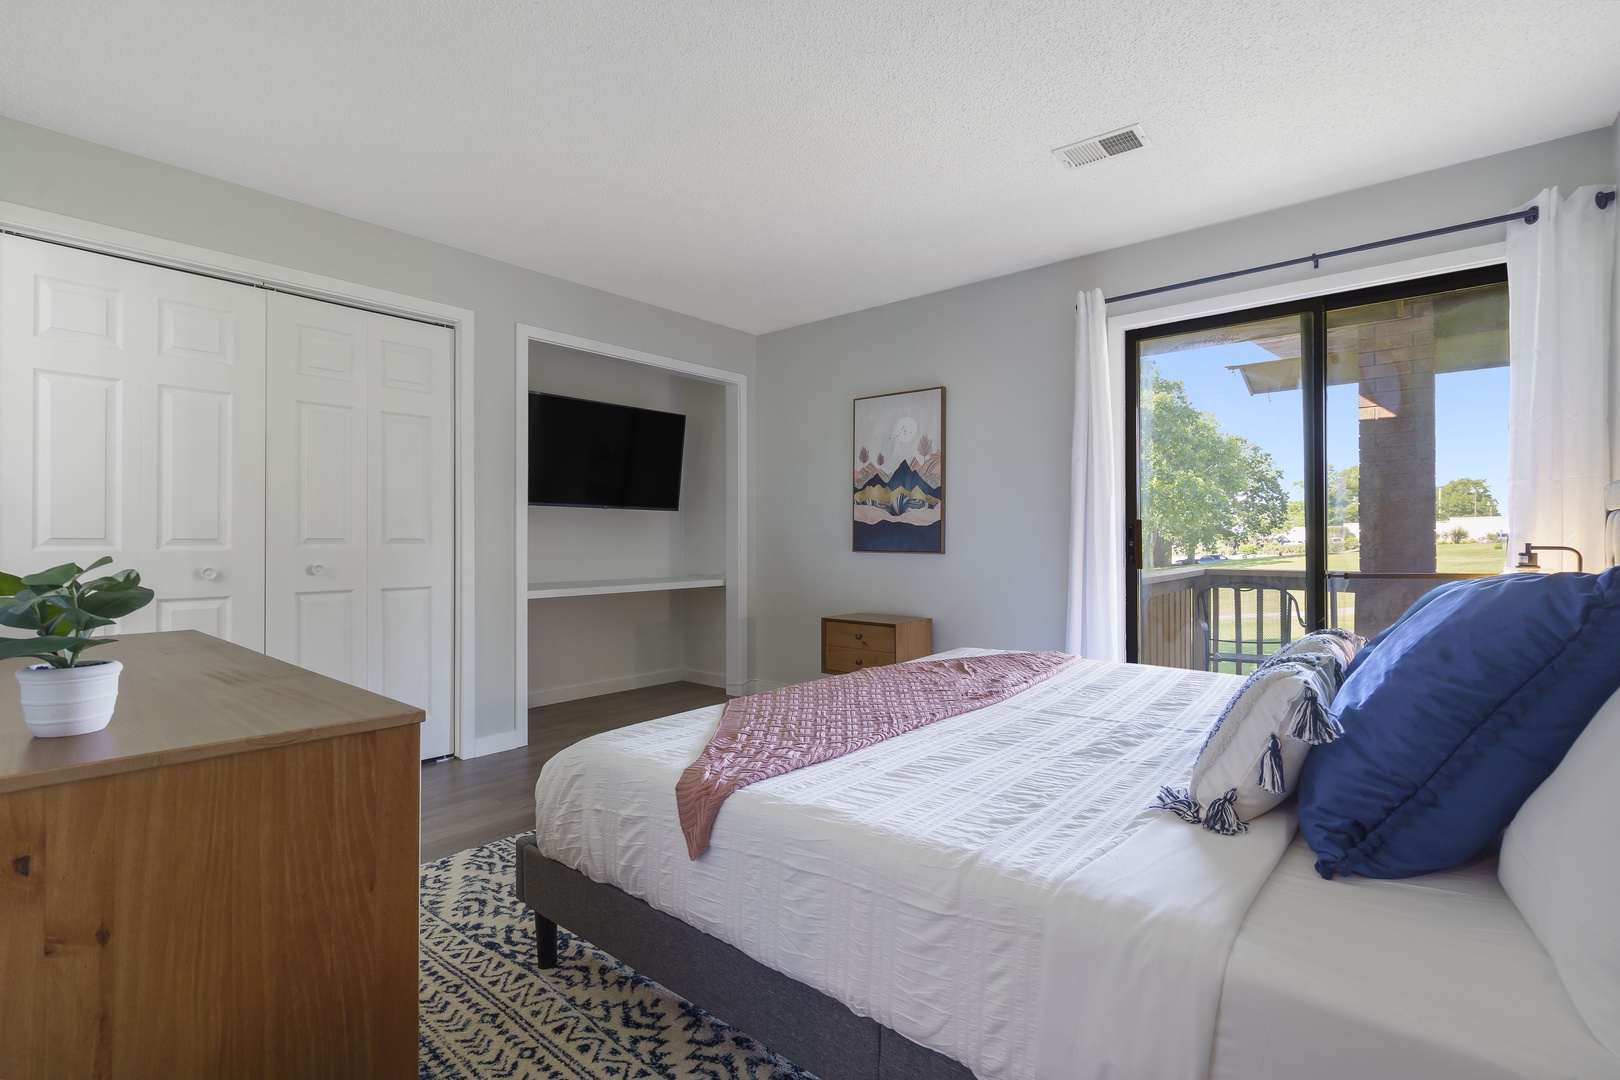 Enjoy the convenience of the balcony off the mater bedroom